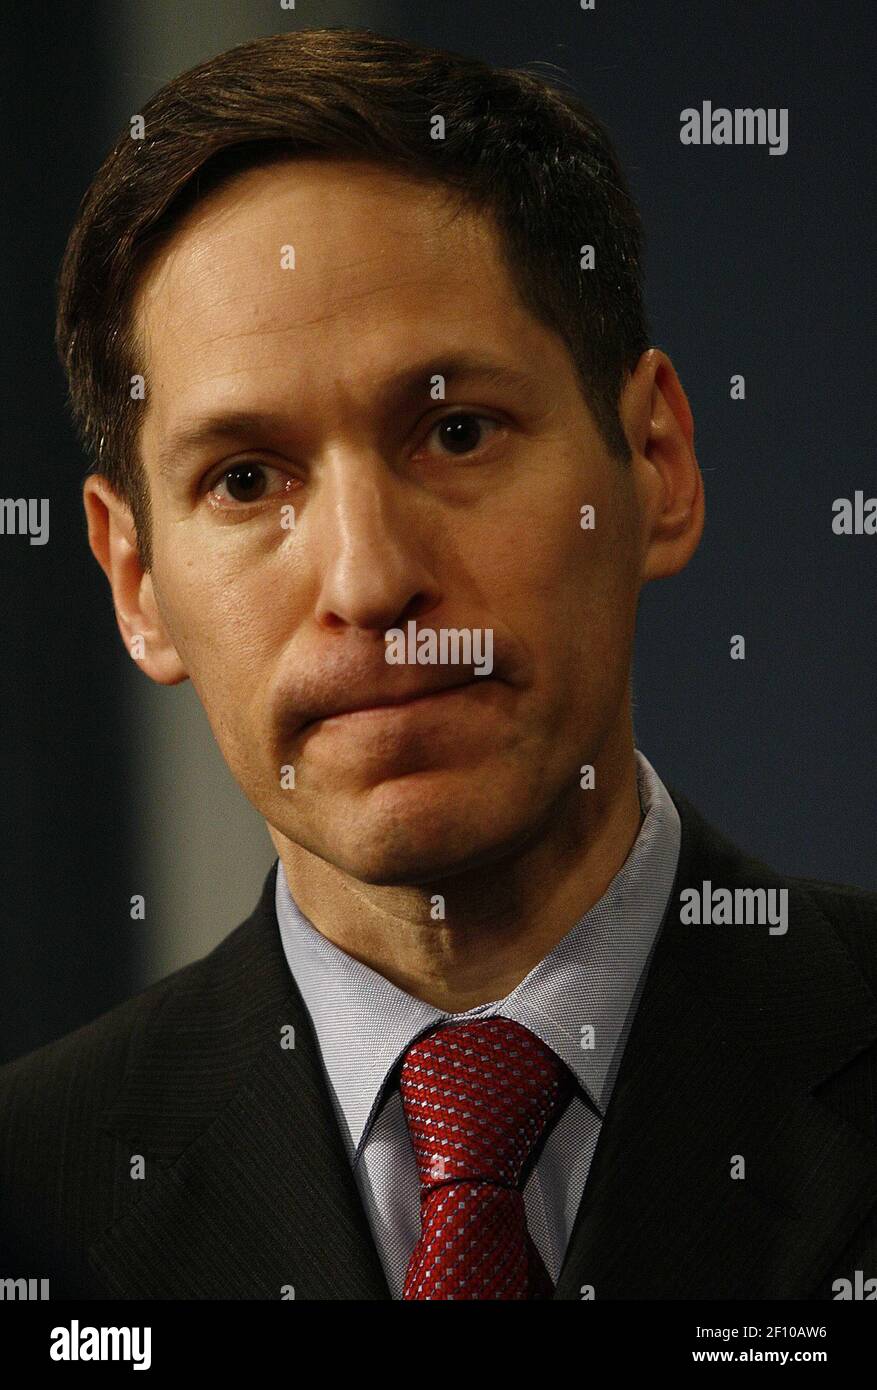 15 May 2009 - President Obama has nominated Dr. Thomas R. Frieden as New  CDC Director. 27 April 2009 - New York, NY - The Commissioner of the  Department of Health and